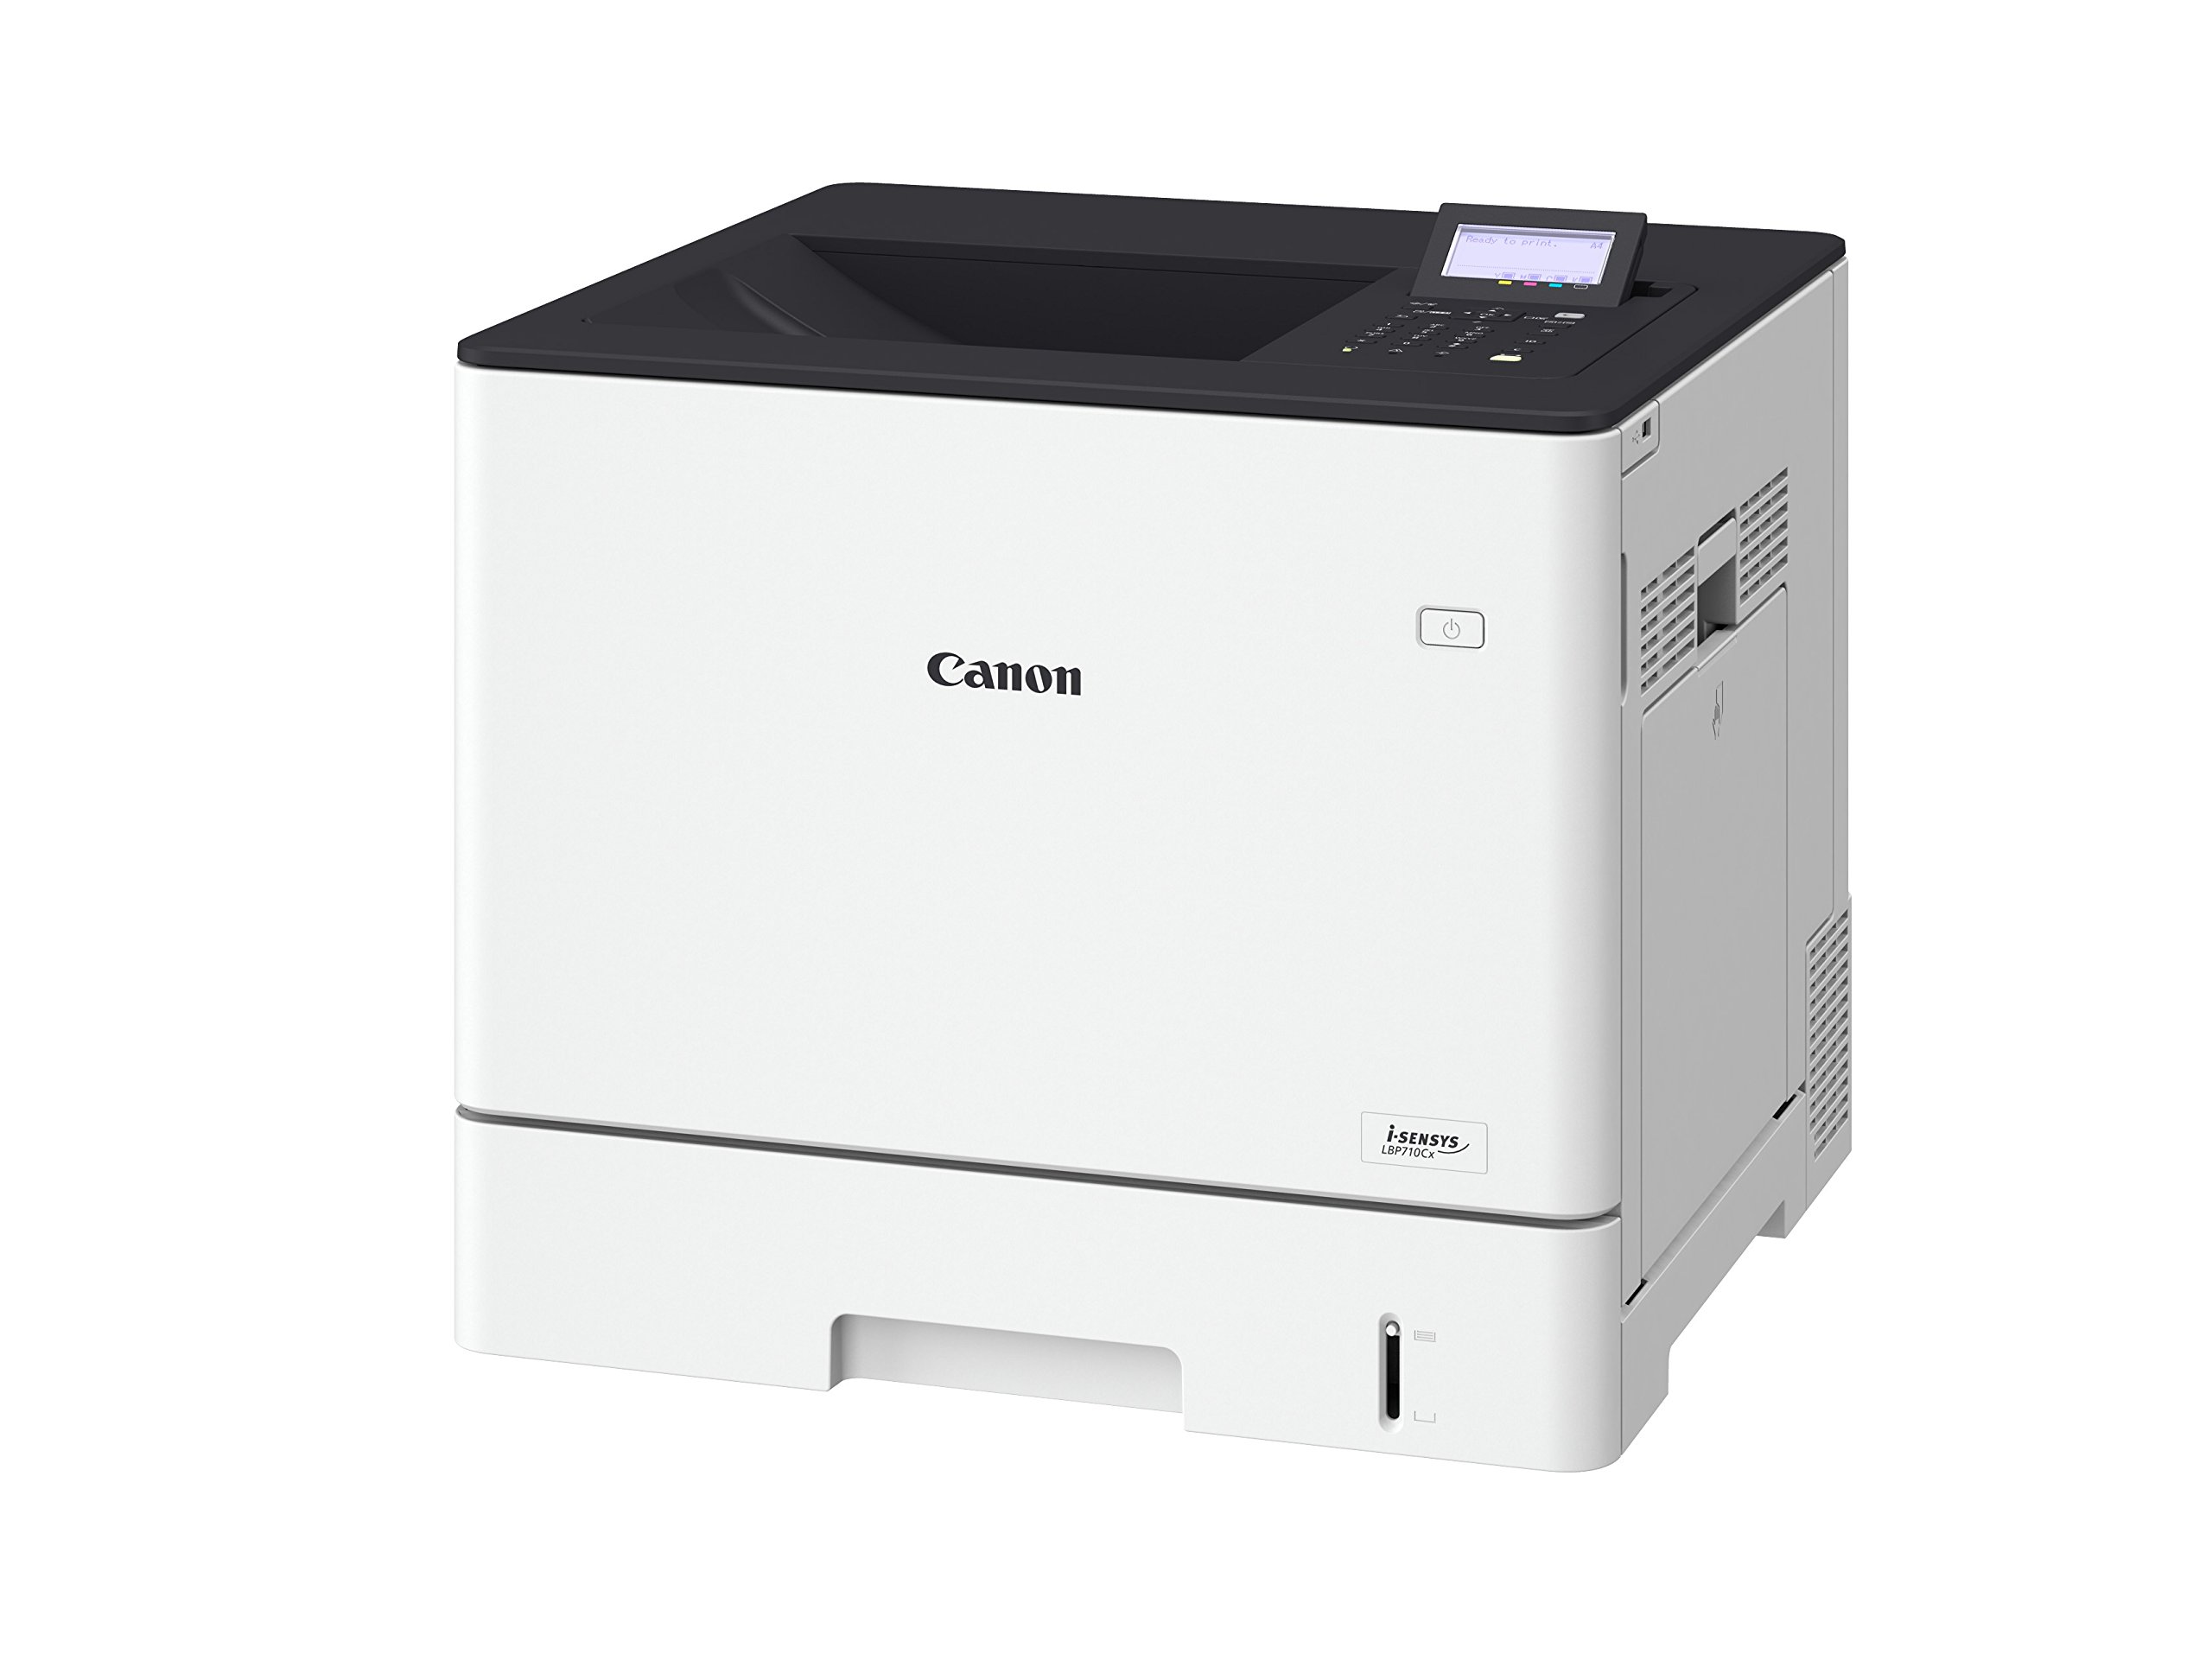 How to Install Canon LBP710Cx/LBP712Cx Printer - Featured